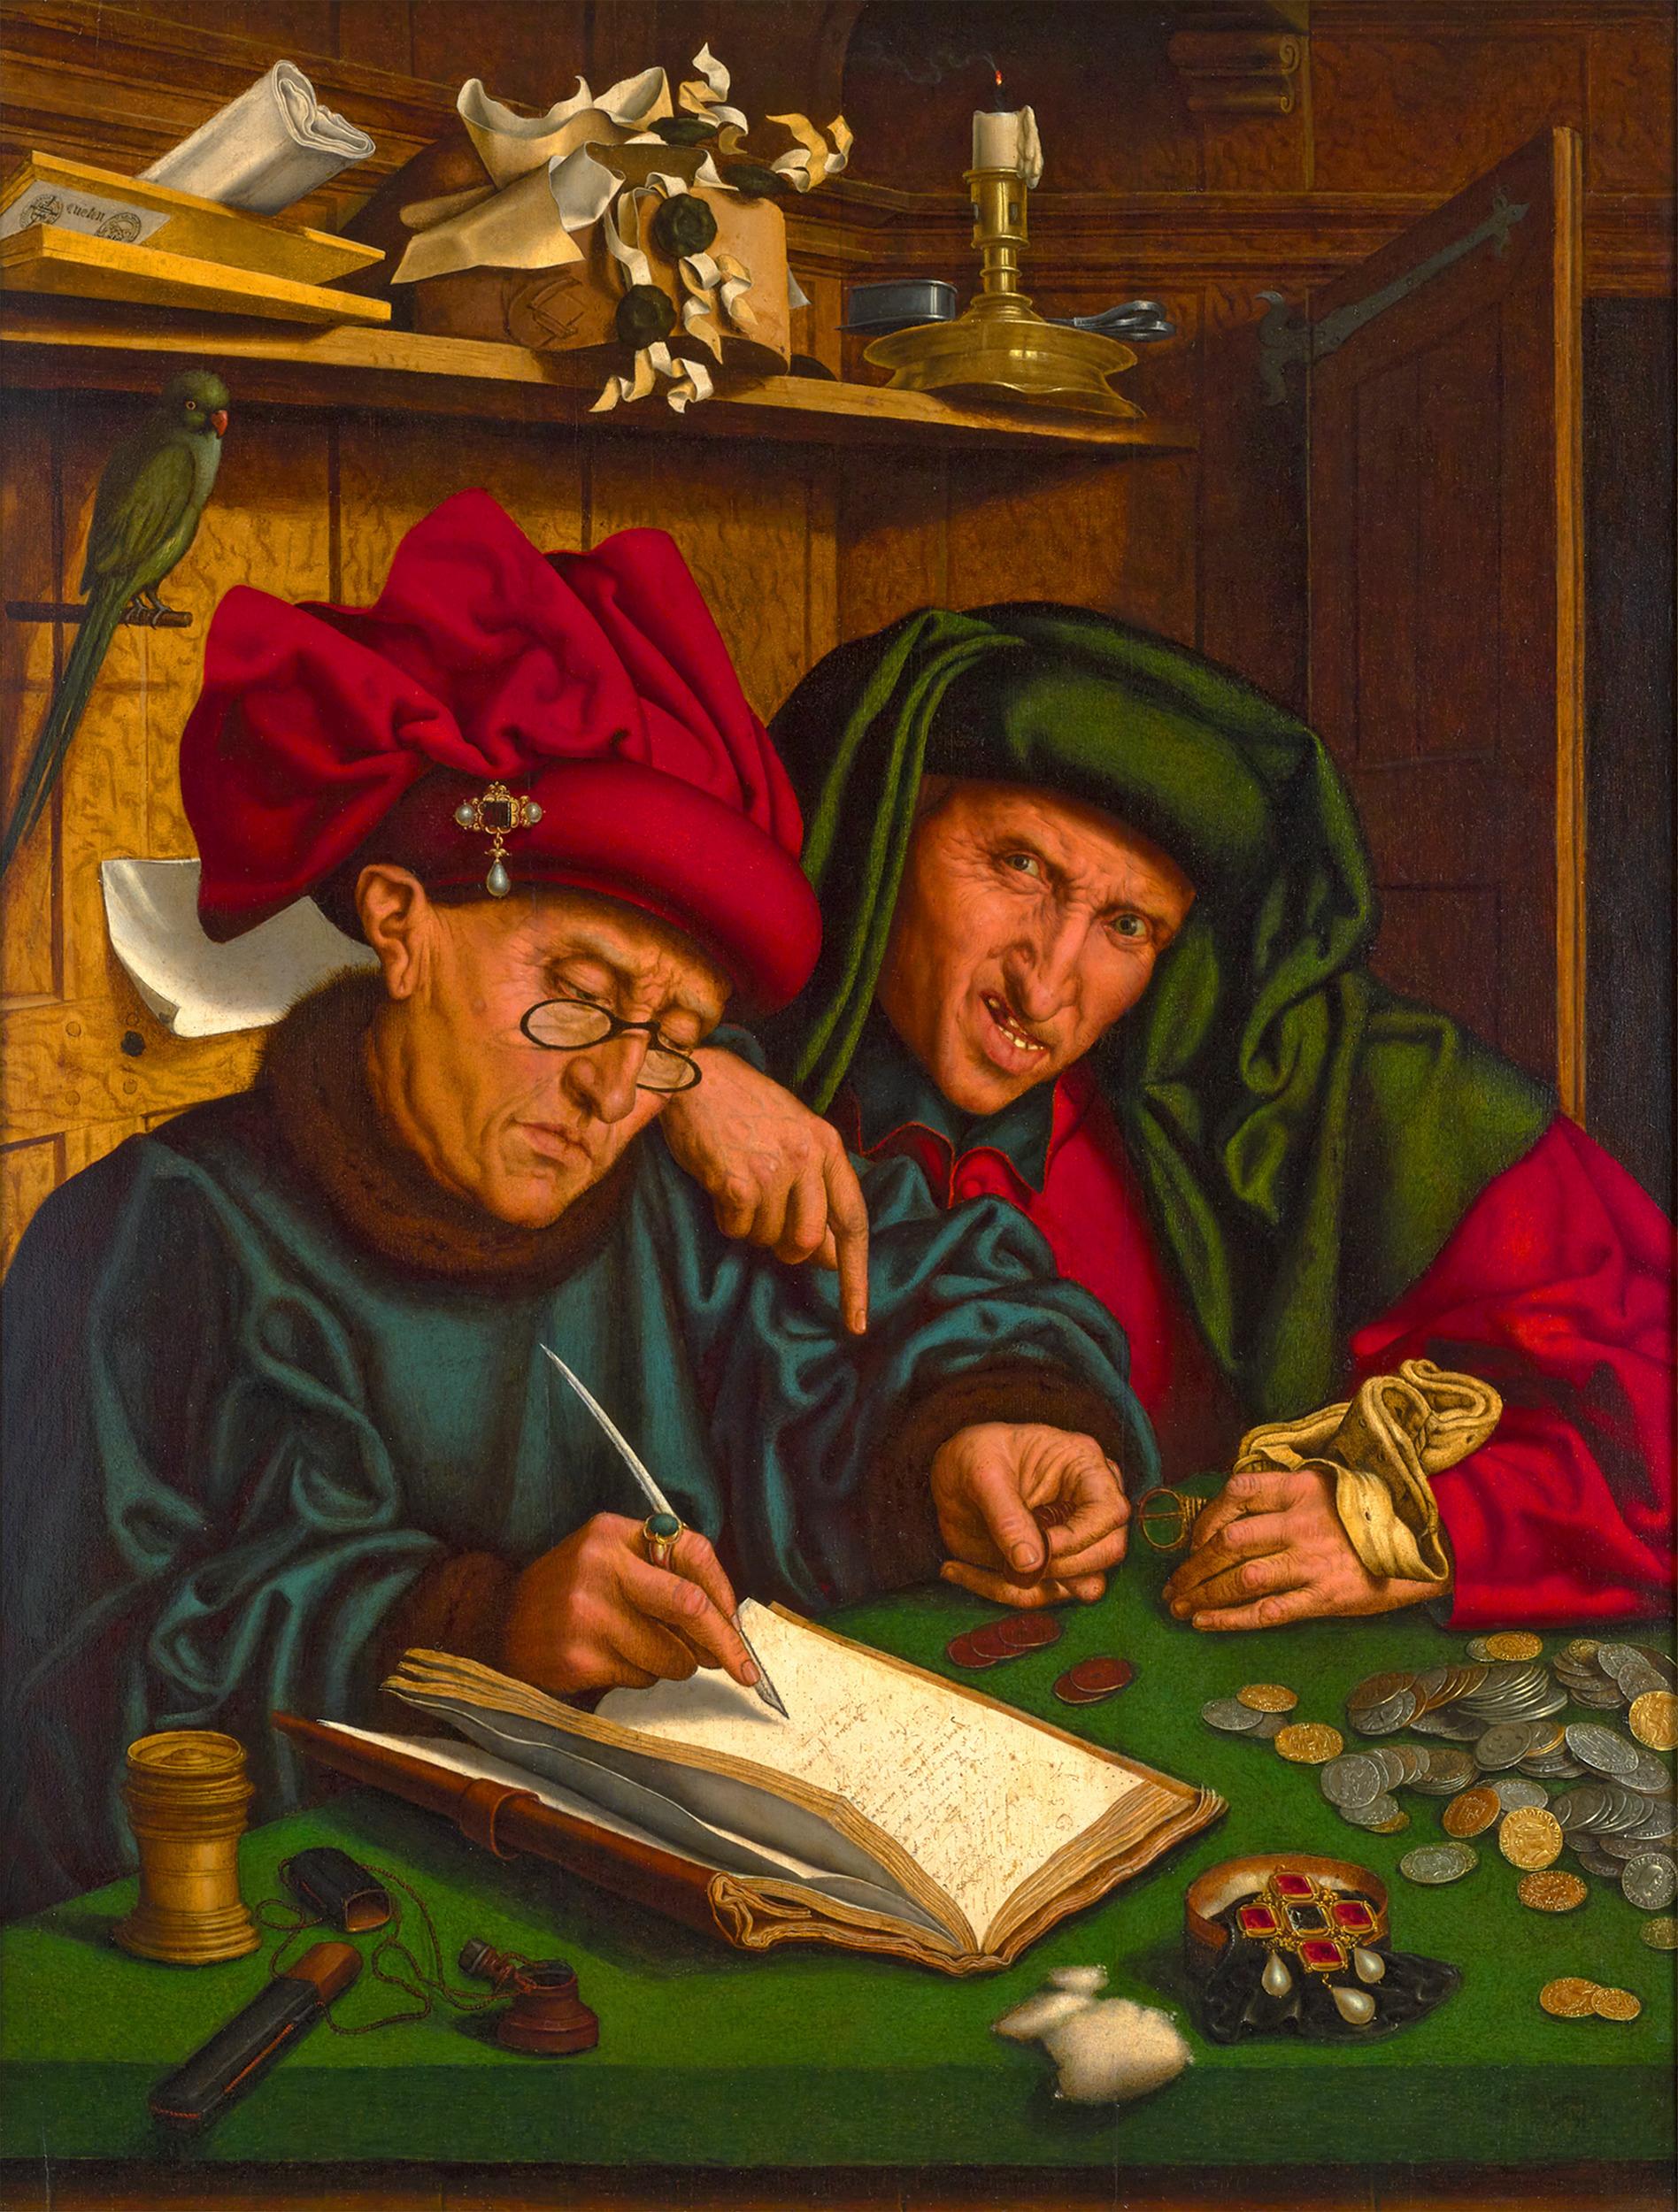 Marinus van Reymerswaele
c.1490 – c.1546  Dutch

The Tax Collectors
16th century
Oil on wood panel

Marinus van Reymerswaele stands among the greatest and most beloved artists of 16th-century Antwerp. Entitled The Tax Collectors, this oil on board